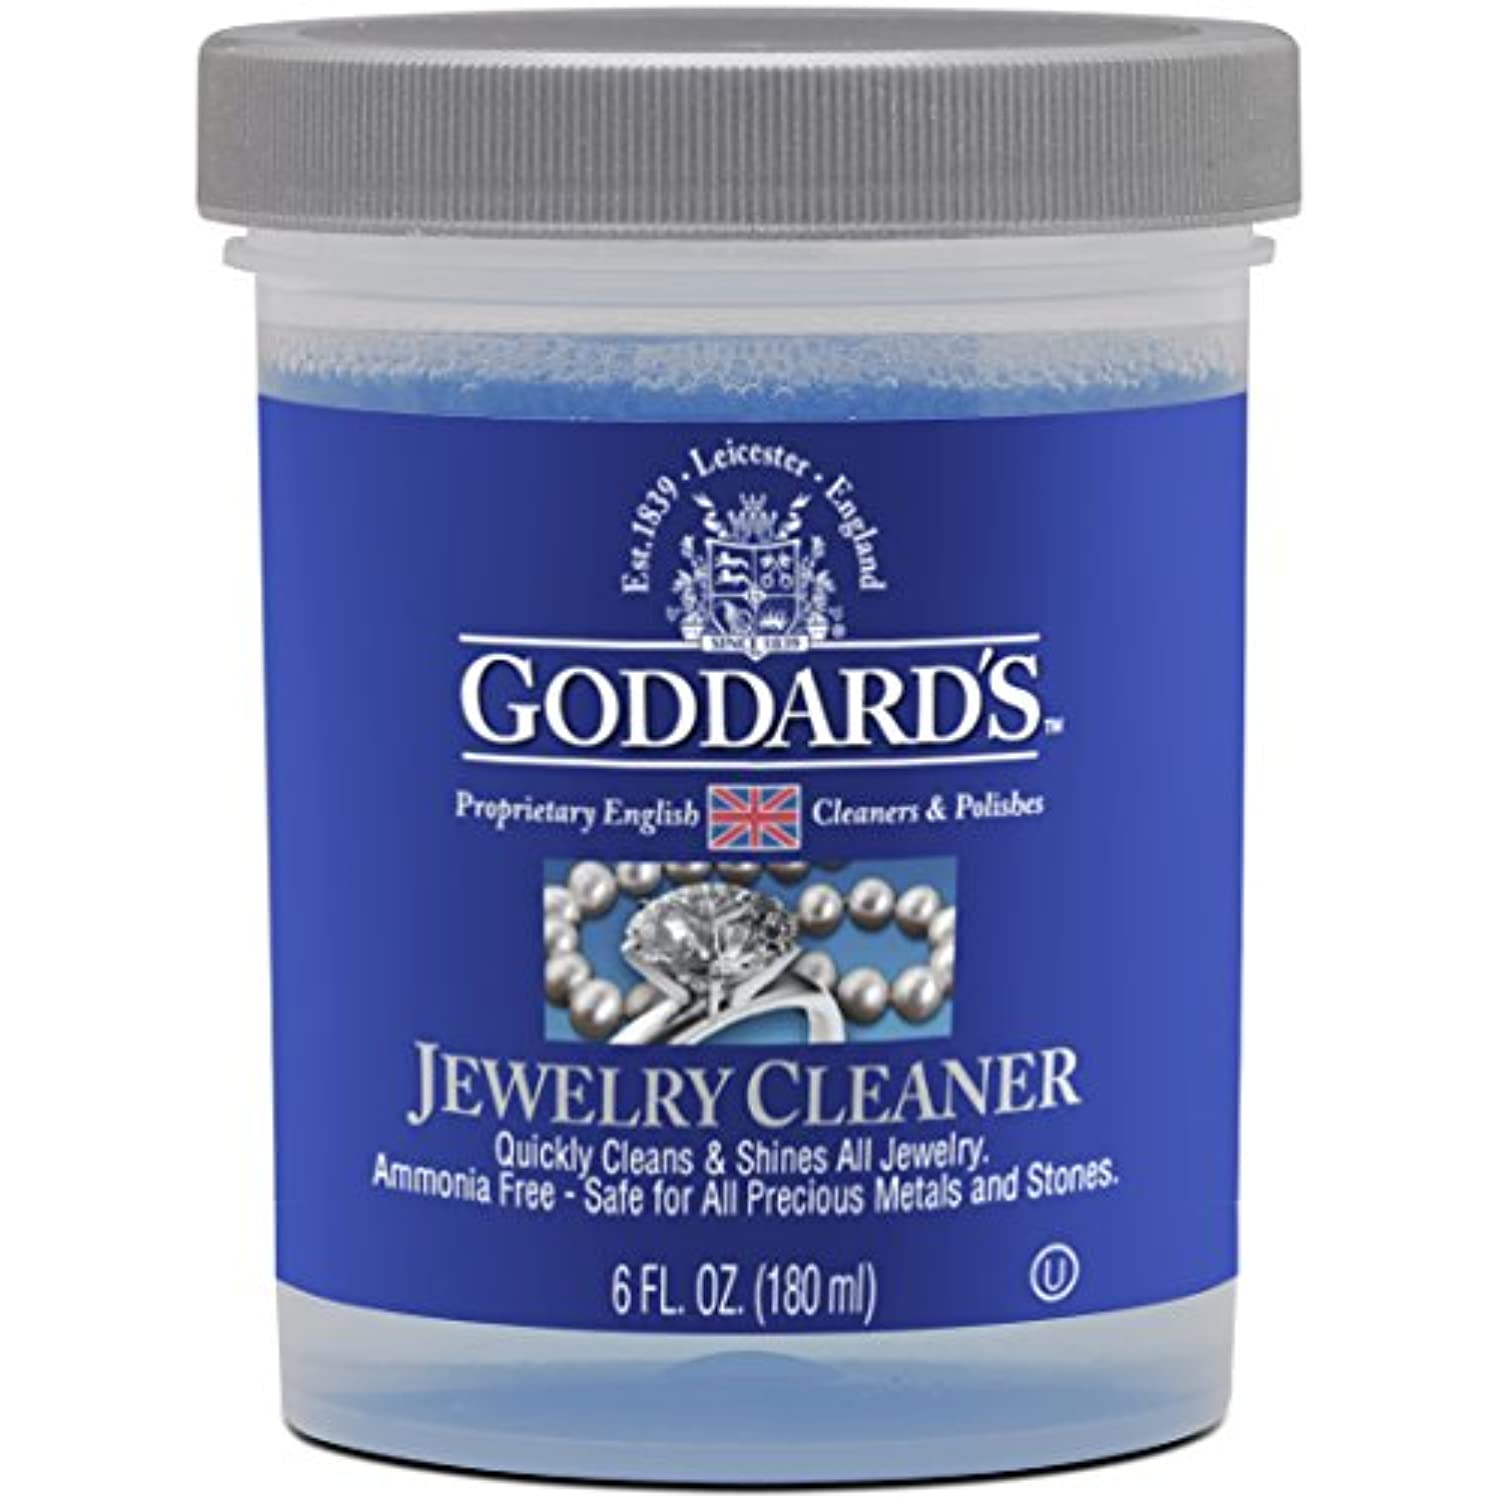 Goddard's Jewelry Cleaner - image 1 of 1